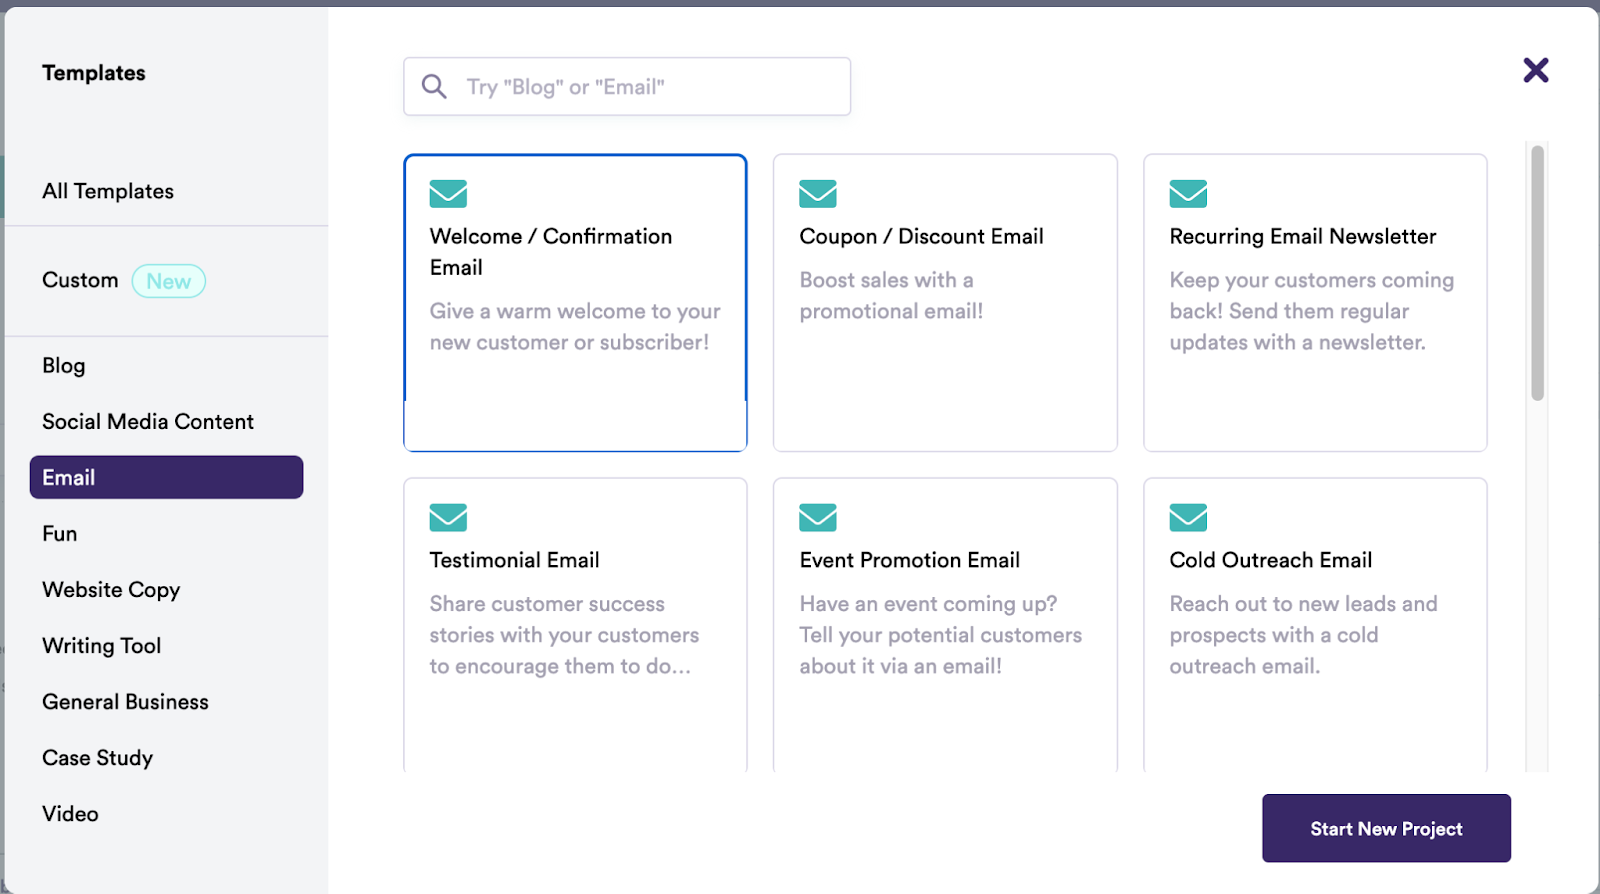 The image displays six different email templates for content creation on Copy.ai. The six buttons display email templates on welcome, coupon, newsletters, testimonials, events, and cold outreach emails.